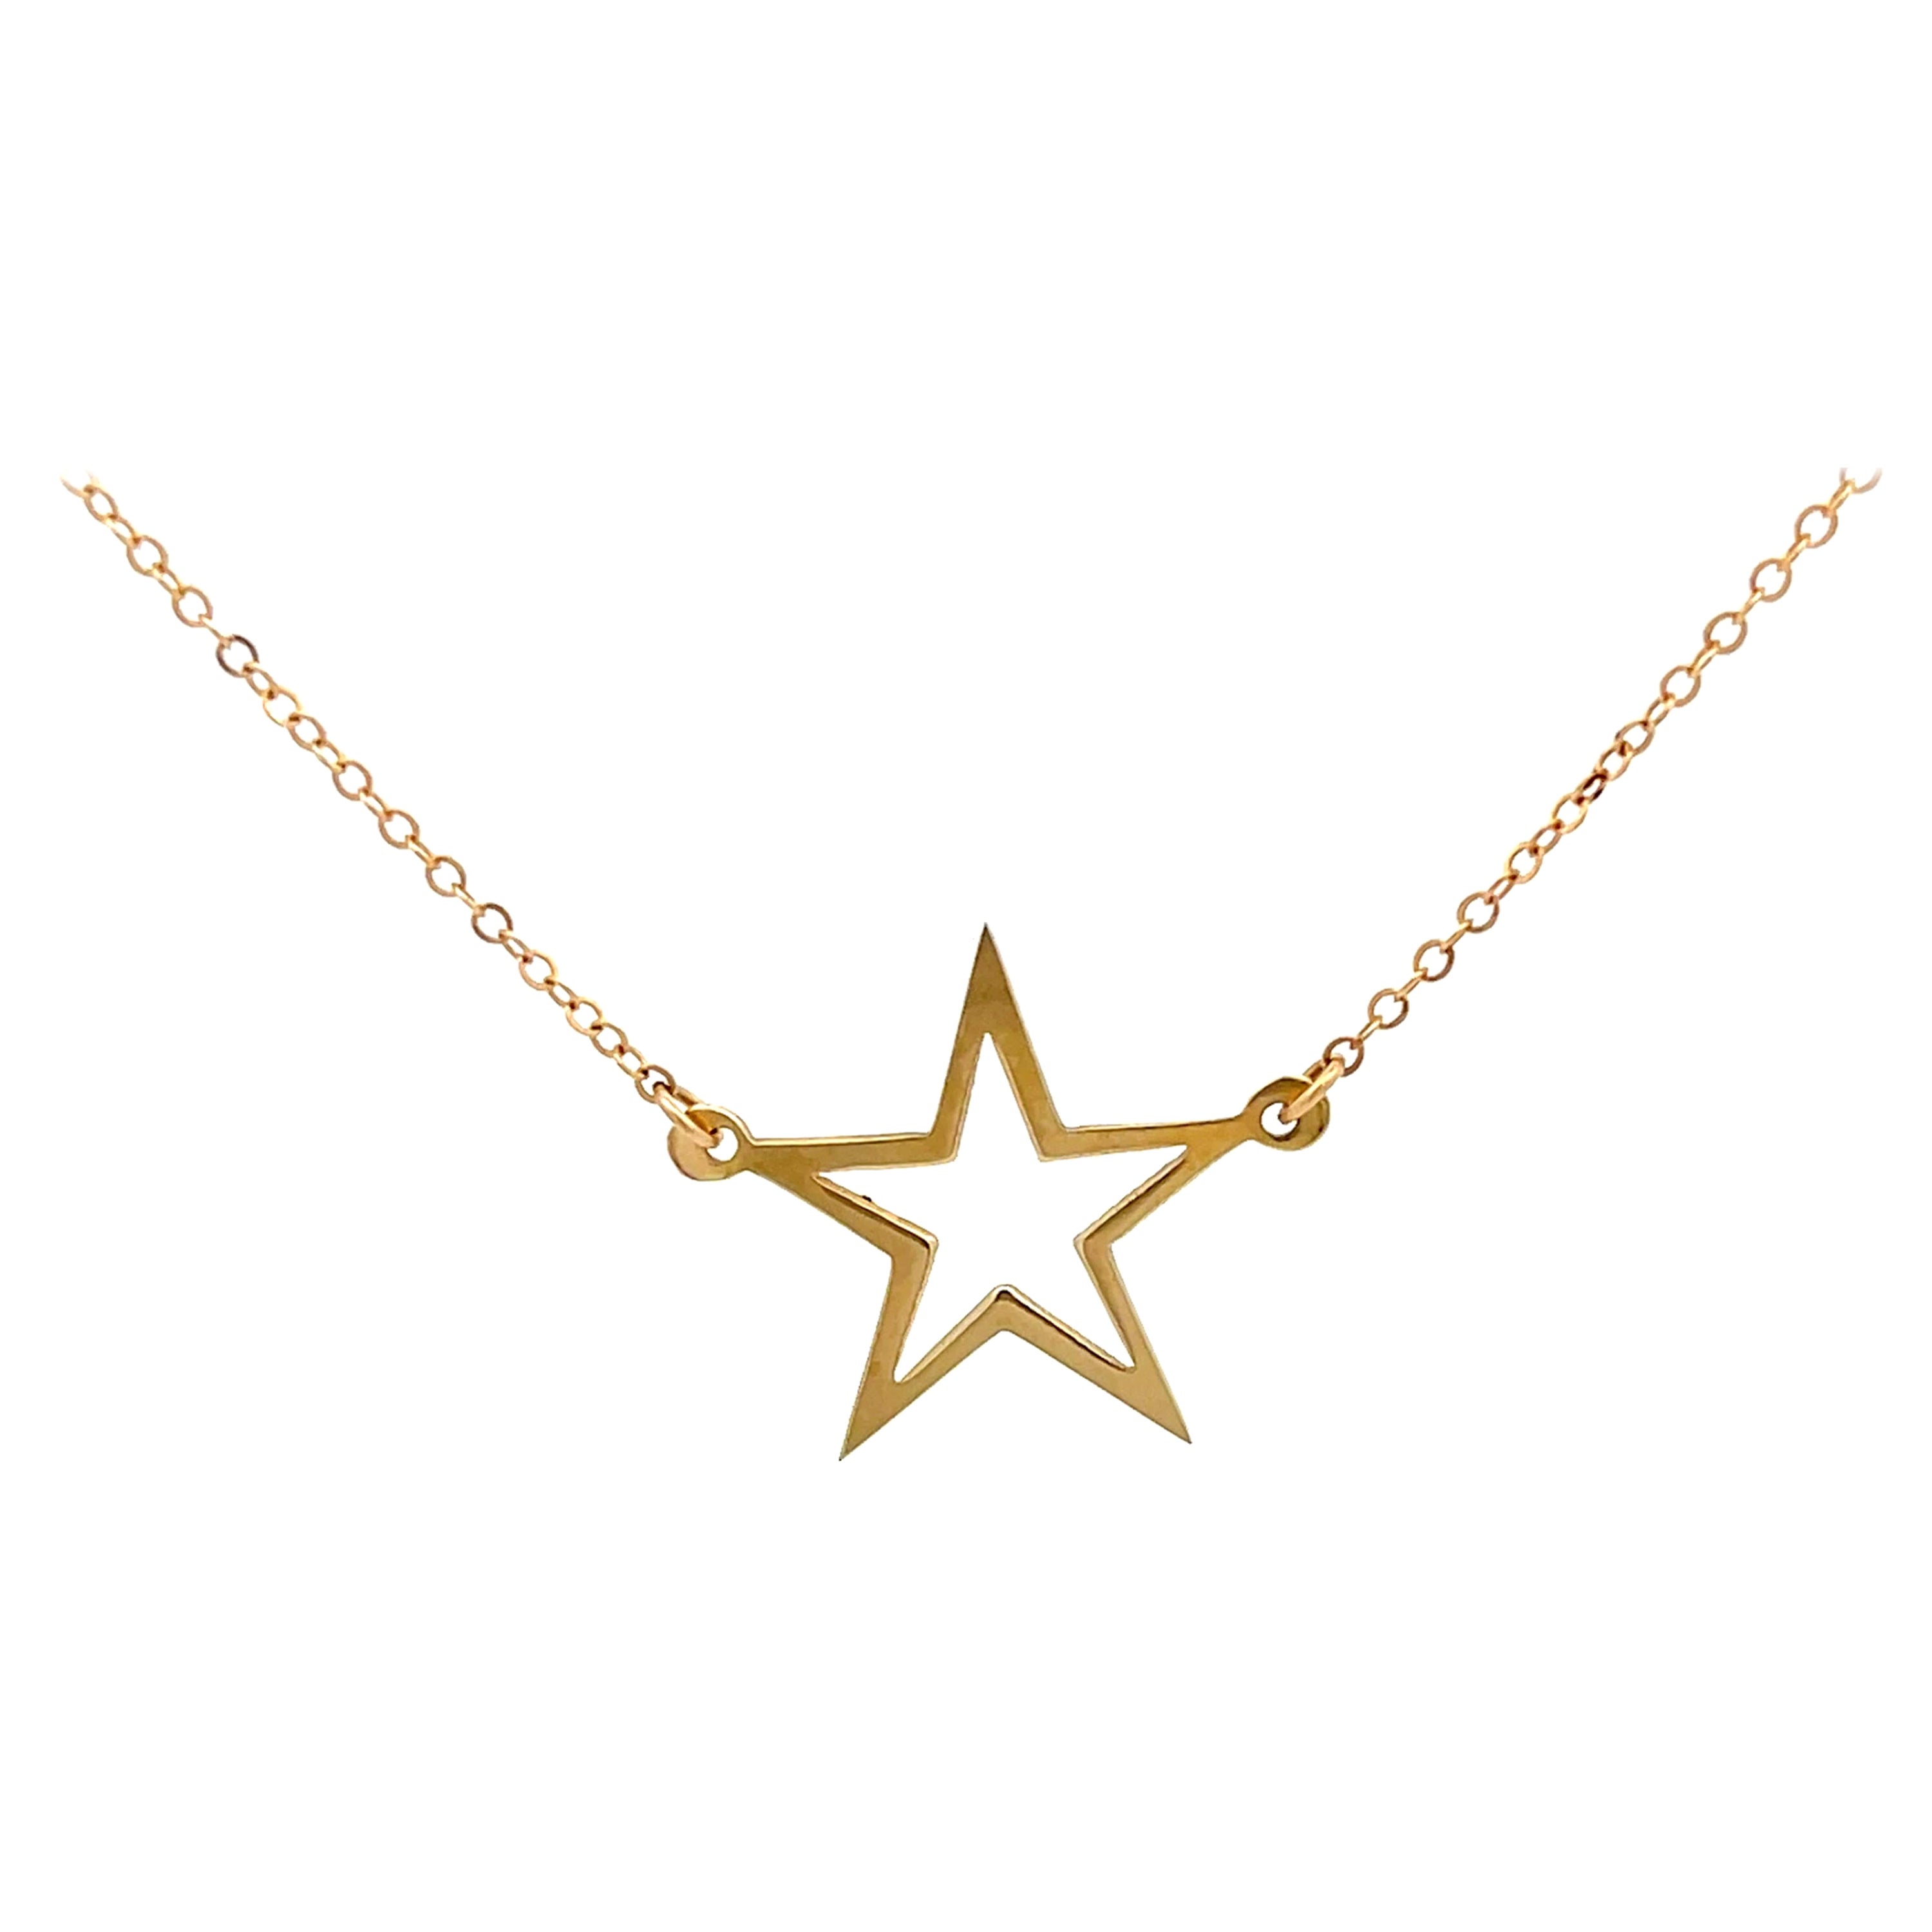 Star Necklace in 14k Yellow Gold